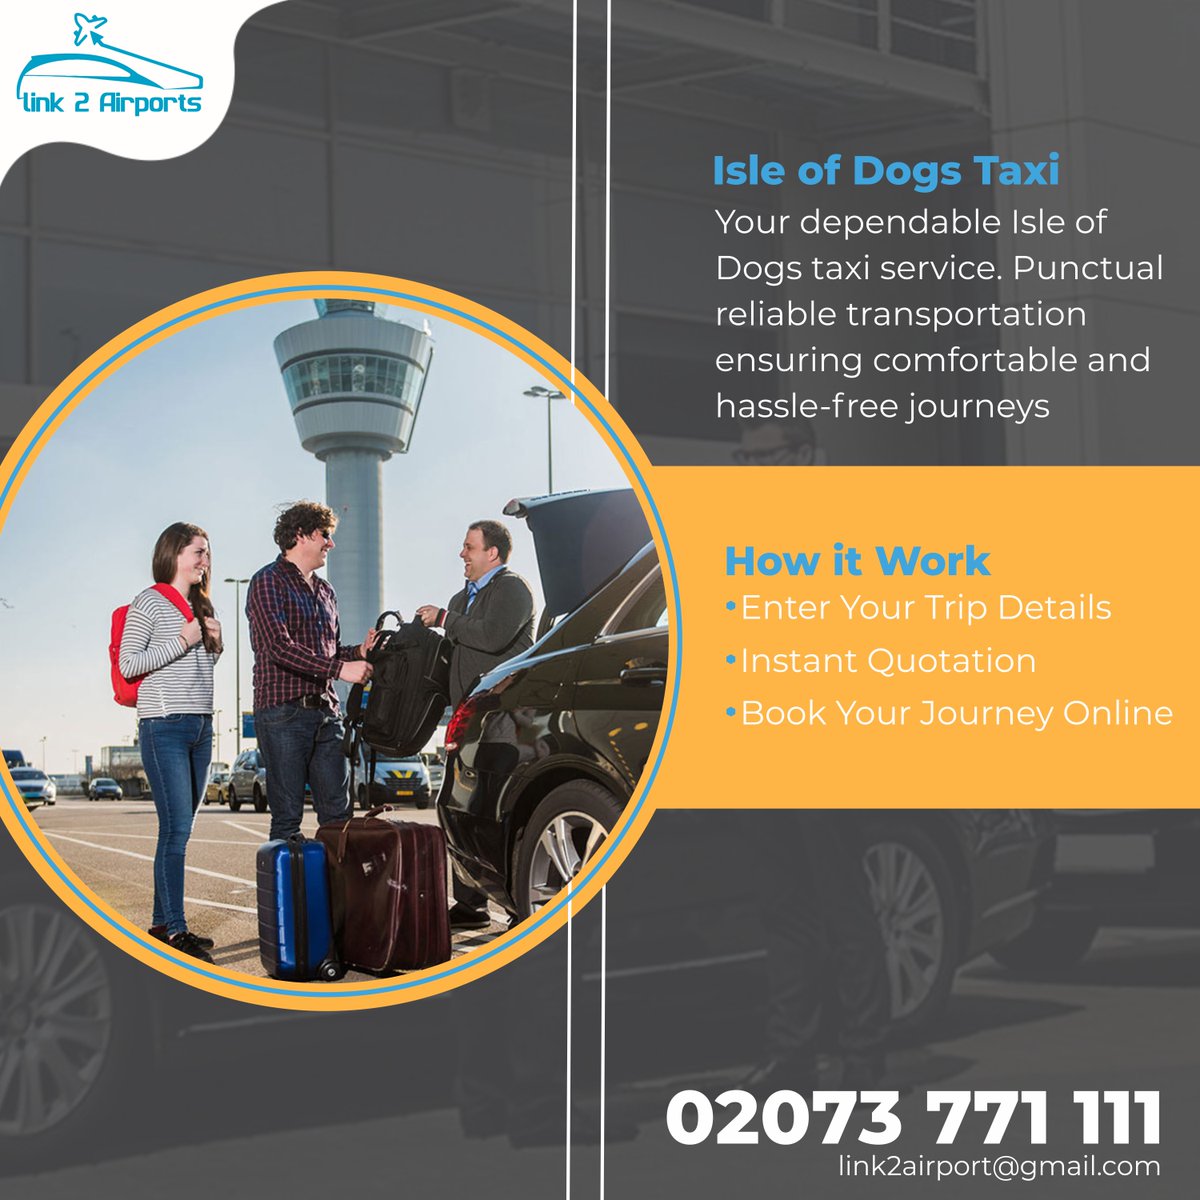 'Link 2 Airport: Your reliable Isle of Dogs taxi service in the UK, offering convenient and comfortable rides to and from the airport.'

services.link2airports.com
#IsleOfDogsTaxi 
#UKAirportTransfers 
#ReliableCabs 
#ConvenientTravel 
#AirportShuttles